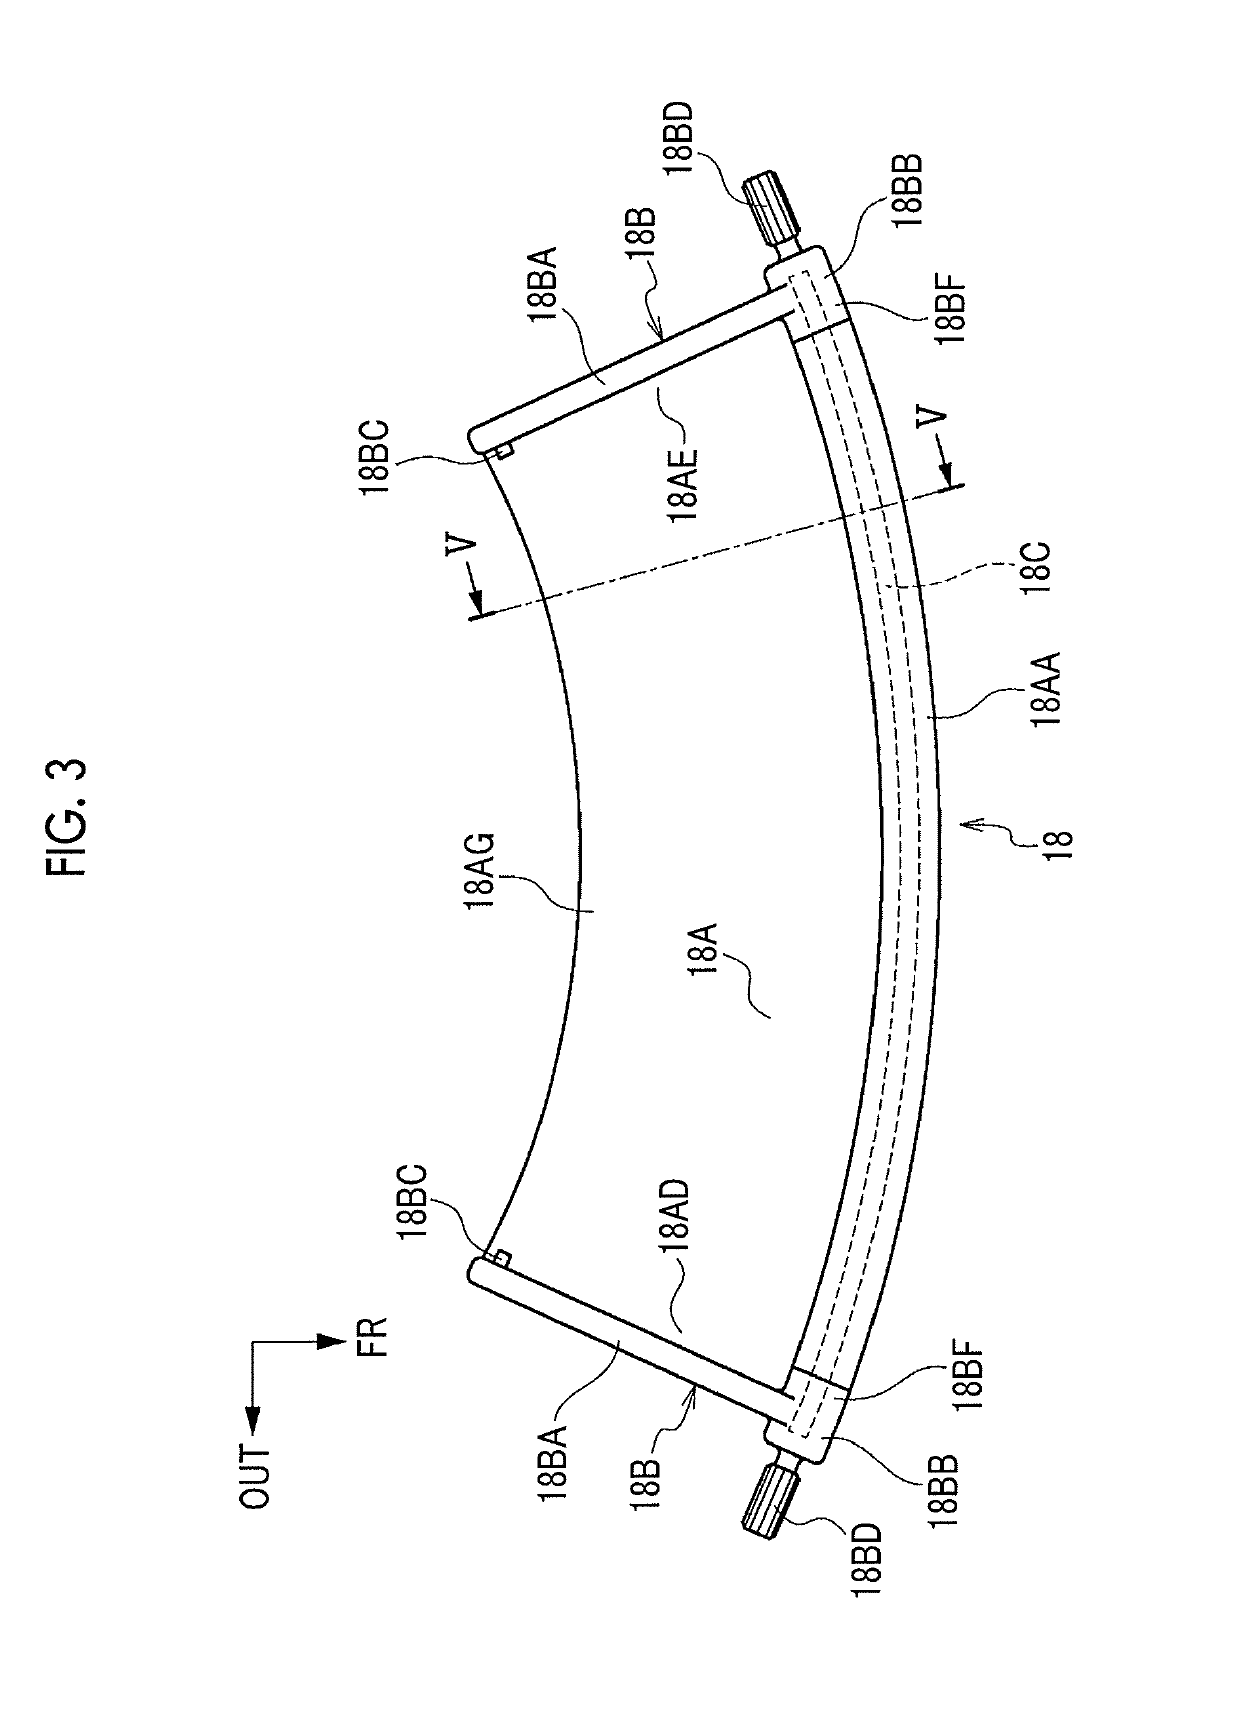 Grille shutter device